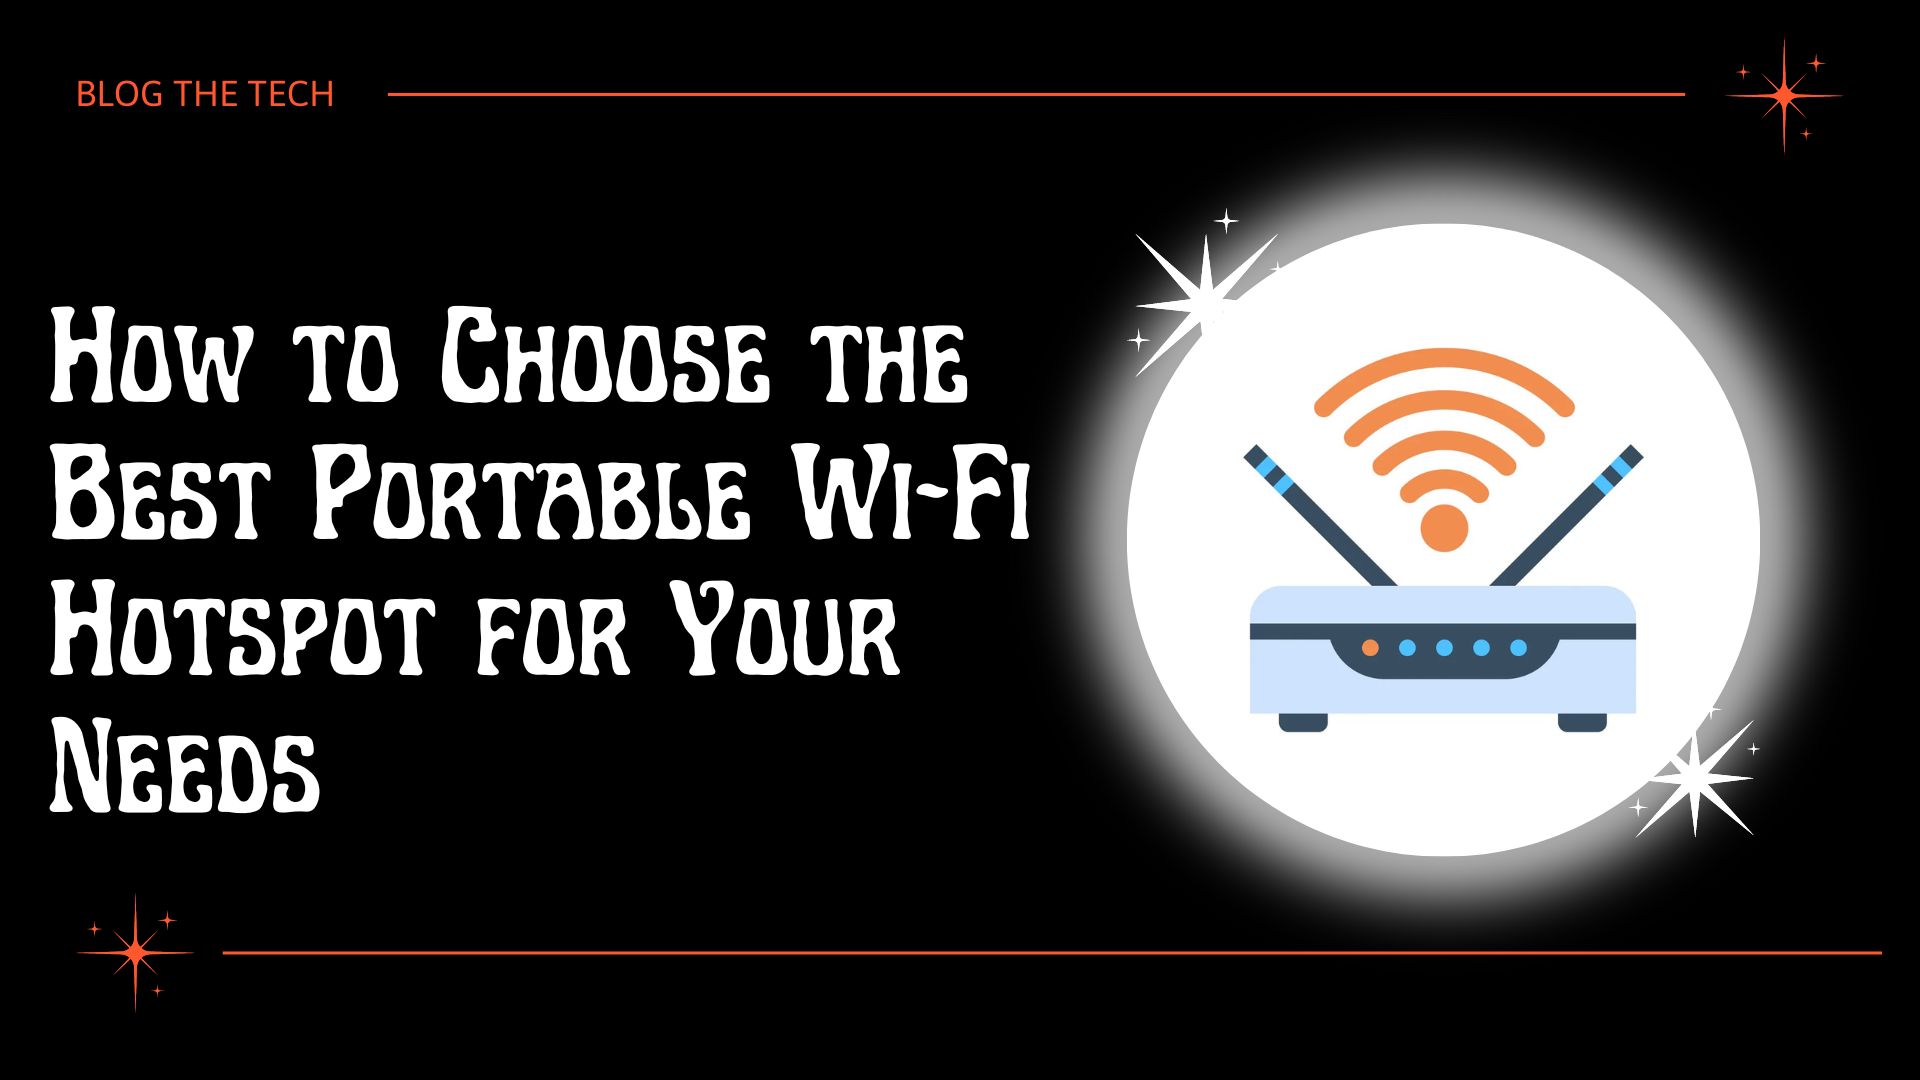 How to Choose the Best Portable Wi-Fi Hotspot for Your Needs